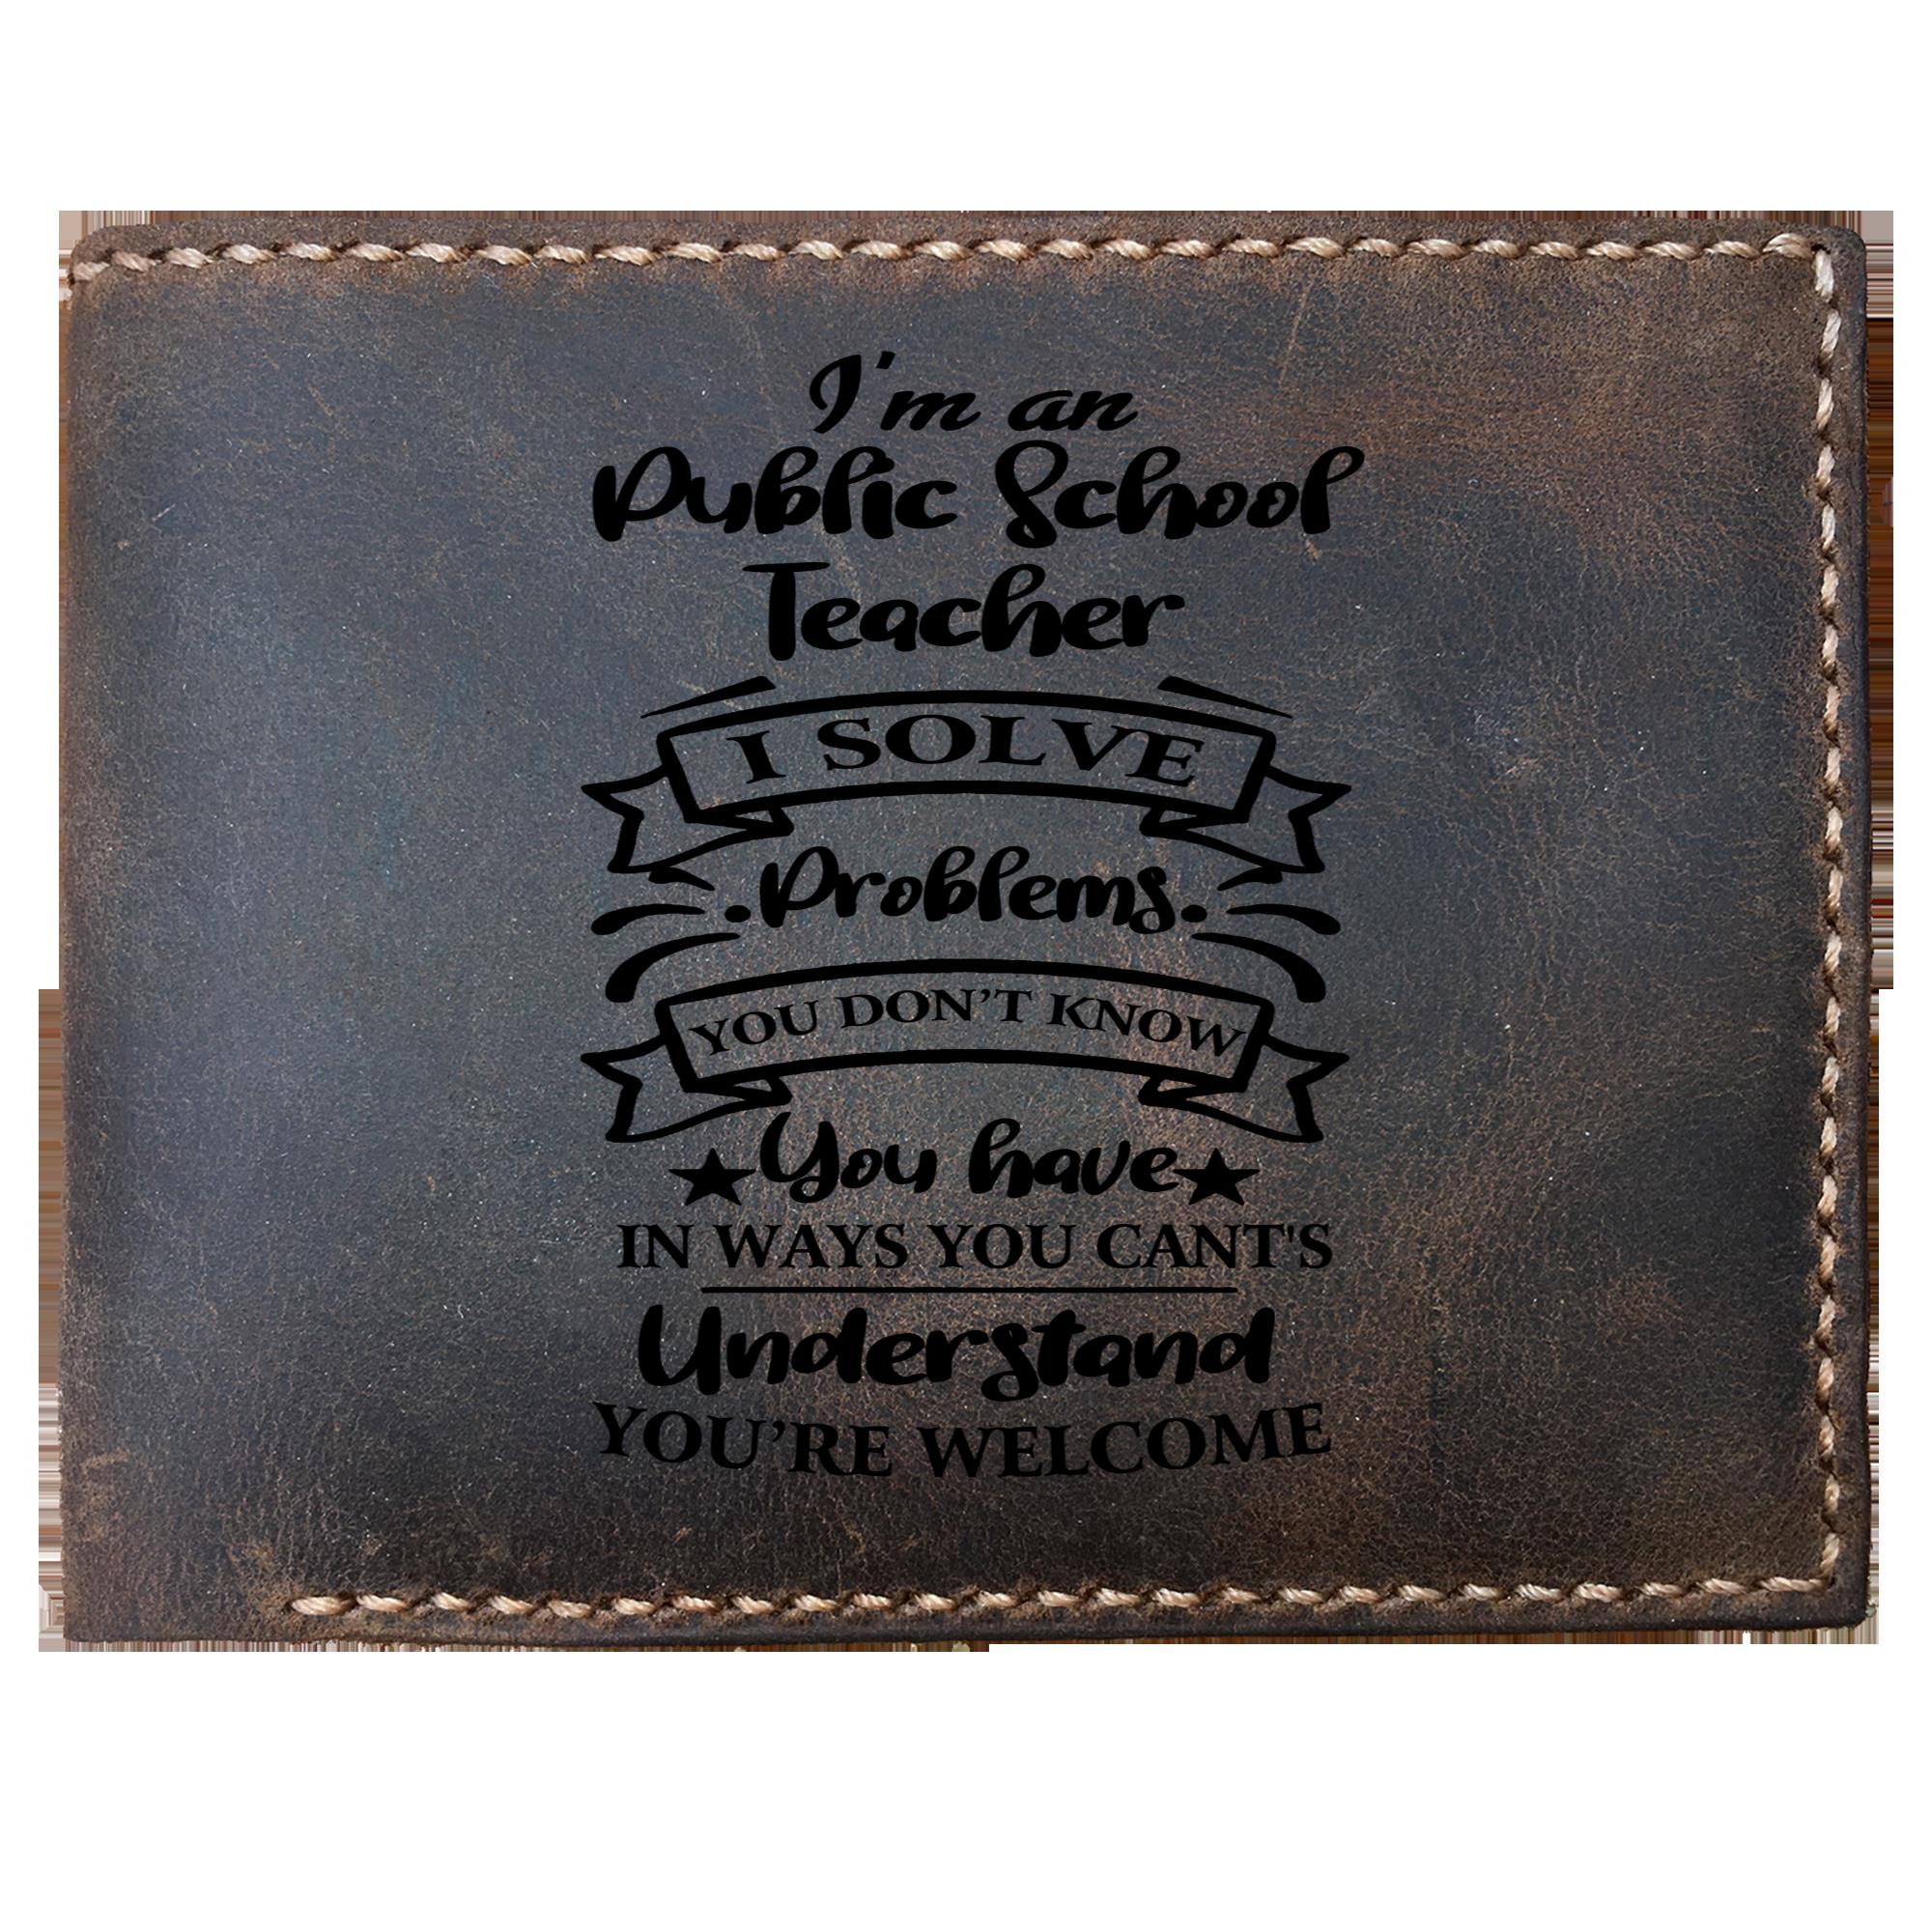 Skitongifts Funny Custom Laser Engraved Bifold Leather Wallet For Men, I'm an Public School Teacher Solve Problems, Father's Day Gifts